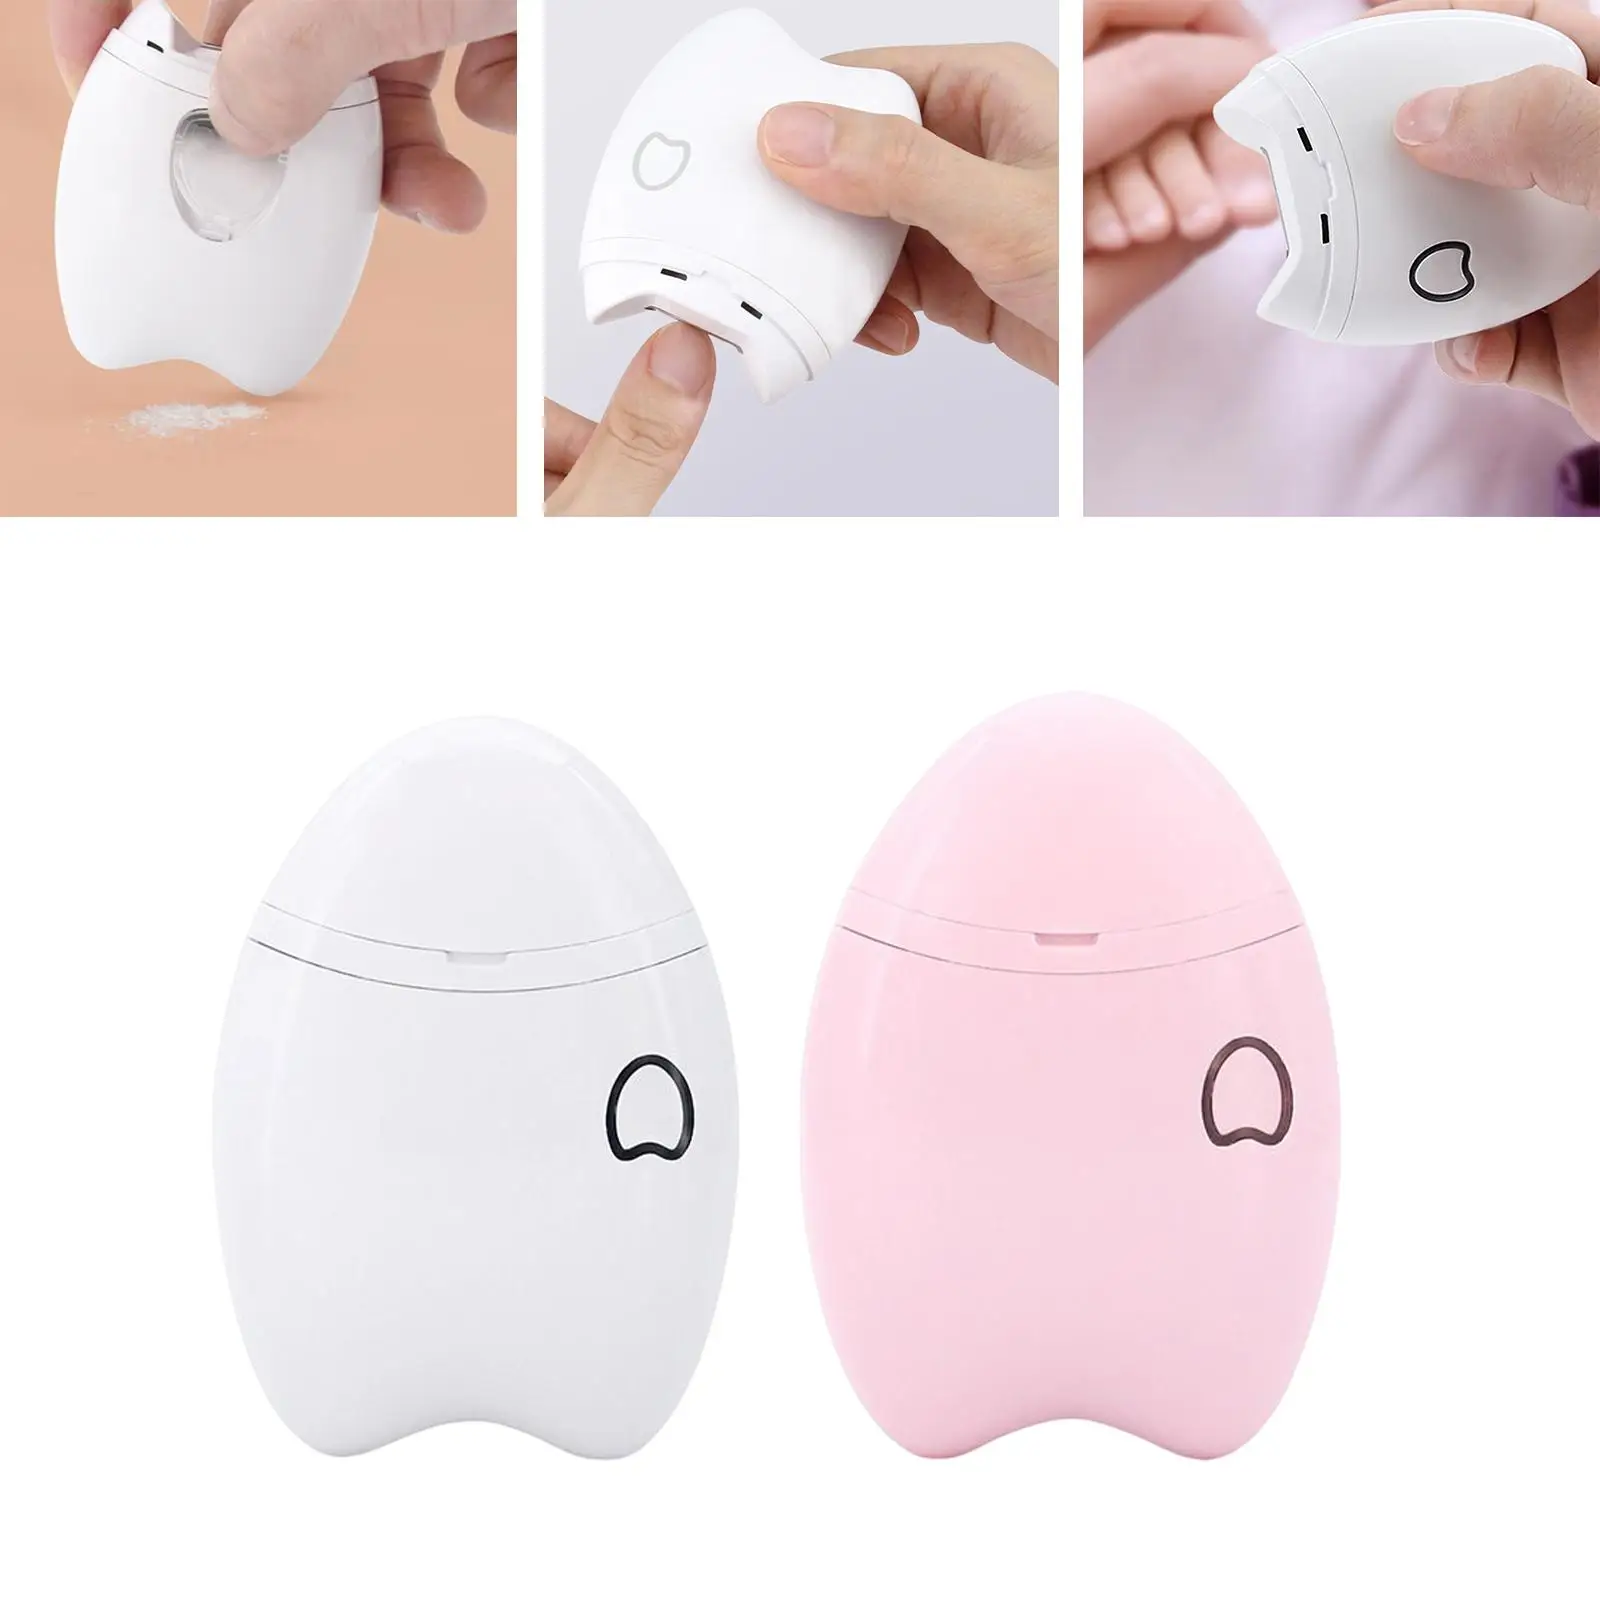 Automatic Electric Baby Nail Clipper Manicure Pedicure Nail Trimmer Compact Nail File Nail Cutter for Kids Household Dormitory